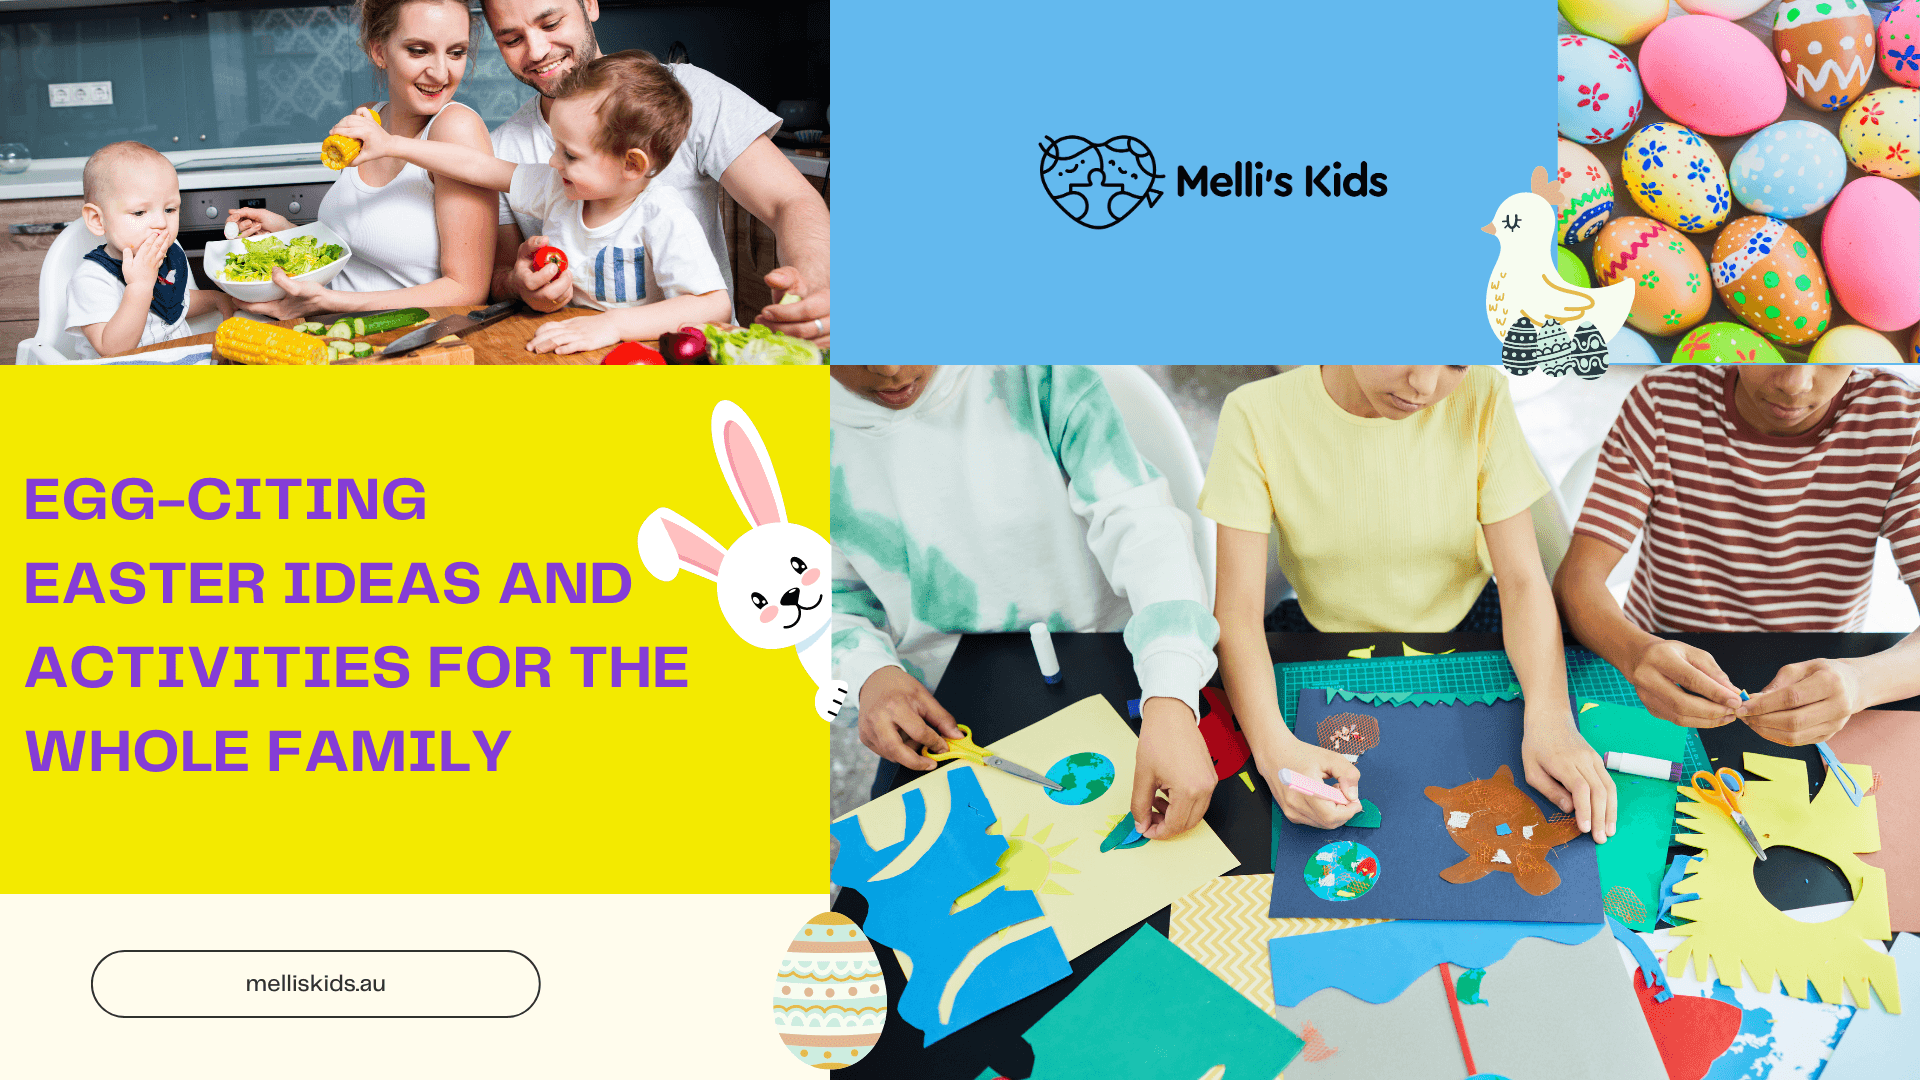 Egg-citing Easter Ideas and Activities for the Whole Family - Melli's Kids